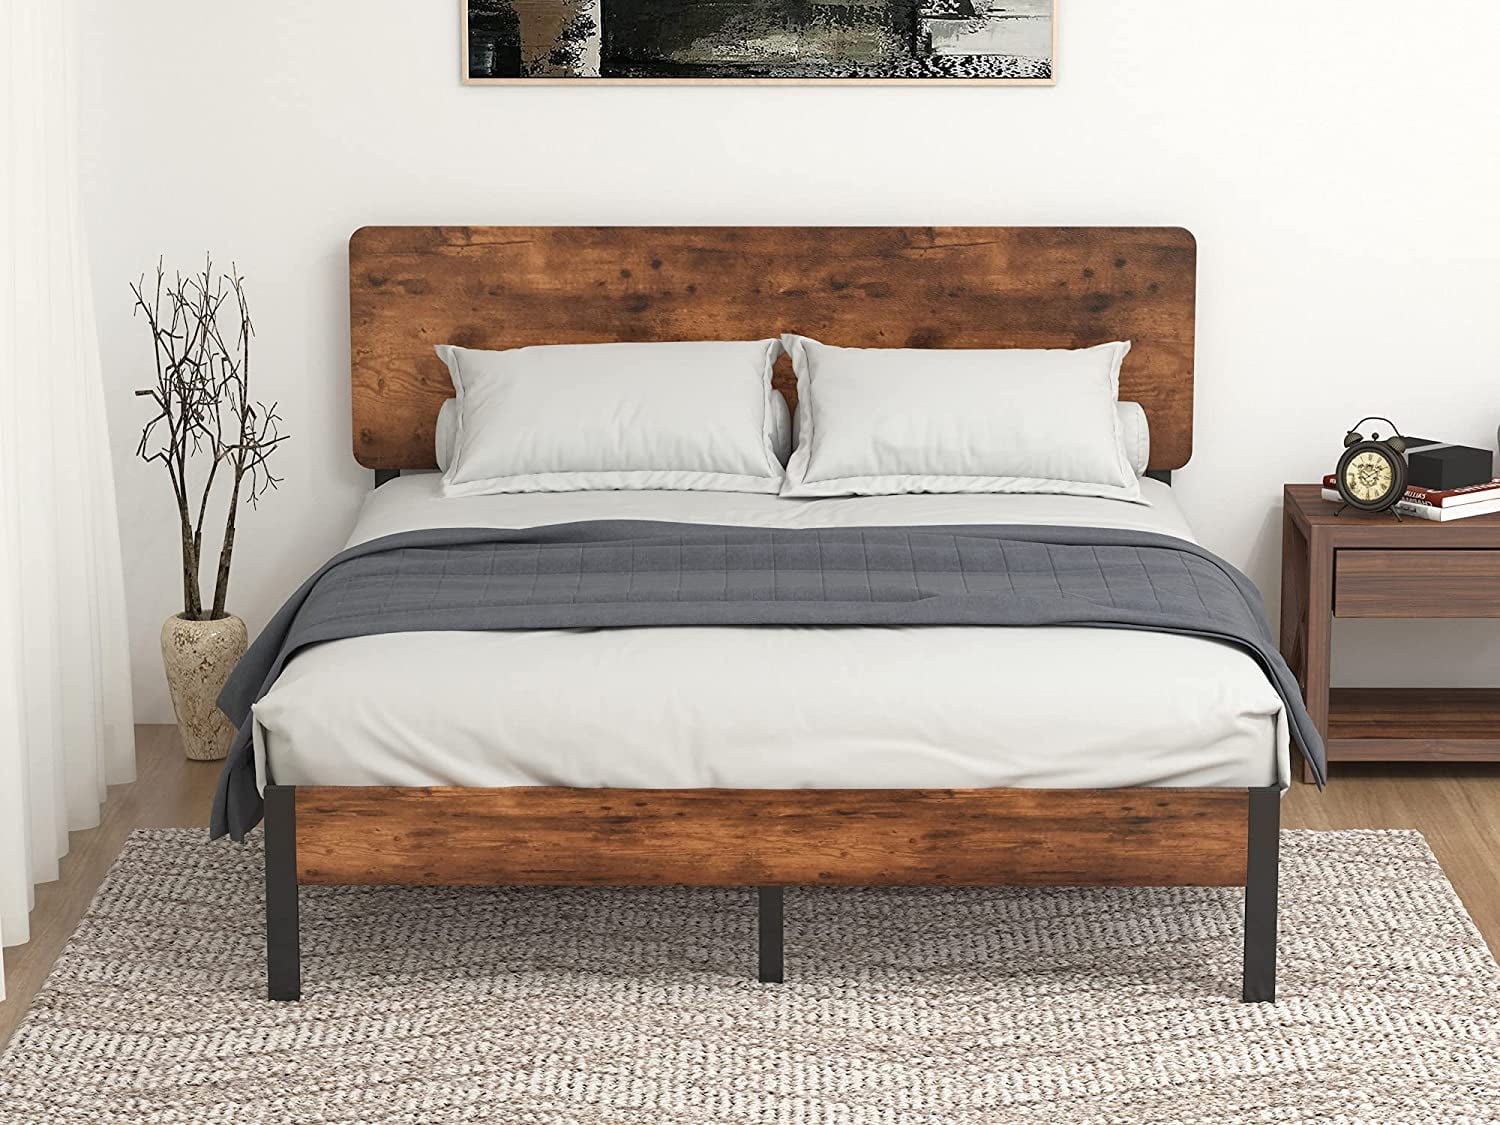 Full/Queen Size Metal Platform Bed Frame w/Wooden Headboard Rustic Country Style 